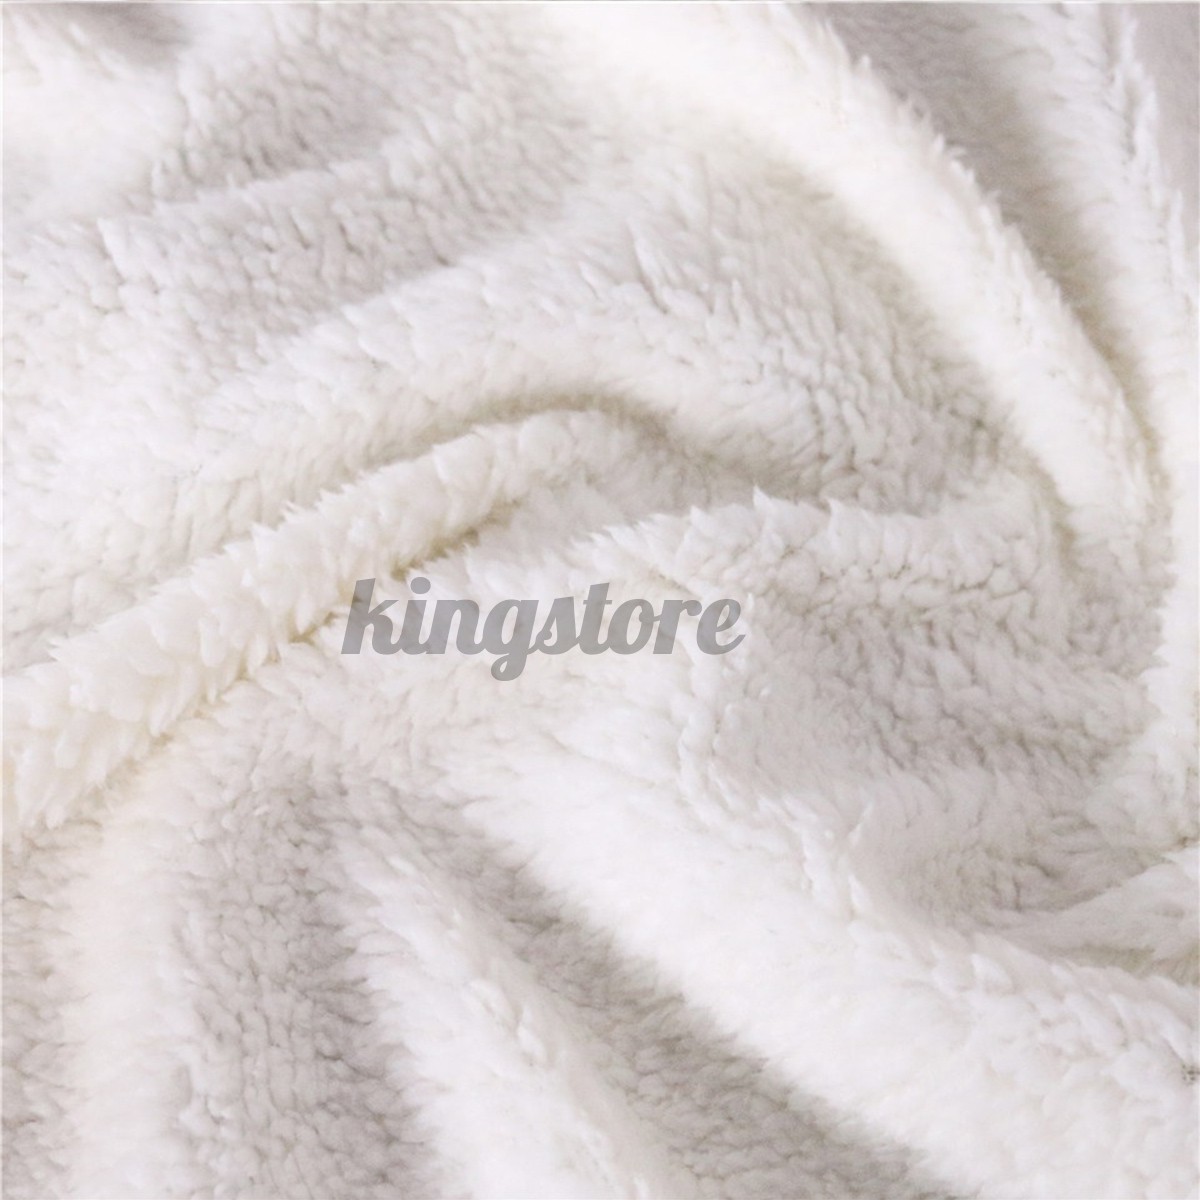 200x150cm Fashion 3D Tiger Printing Plush Fleece Blanket Quilts Bedding Home Office Washable Blanket